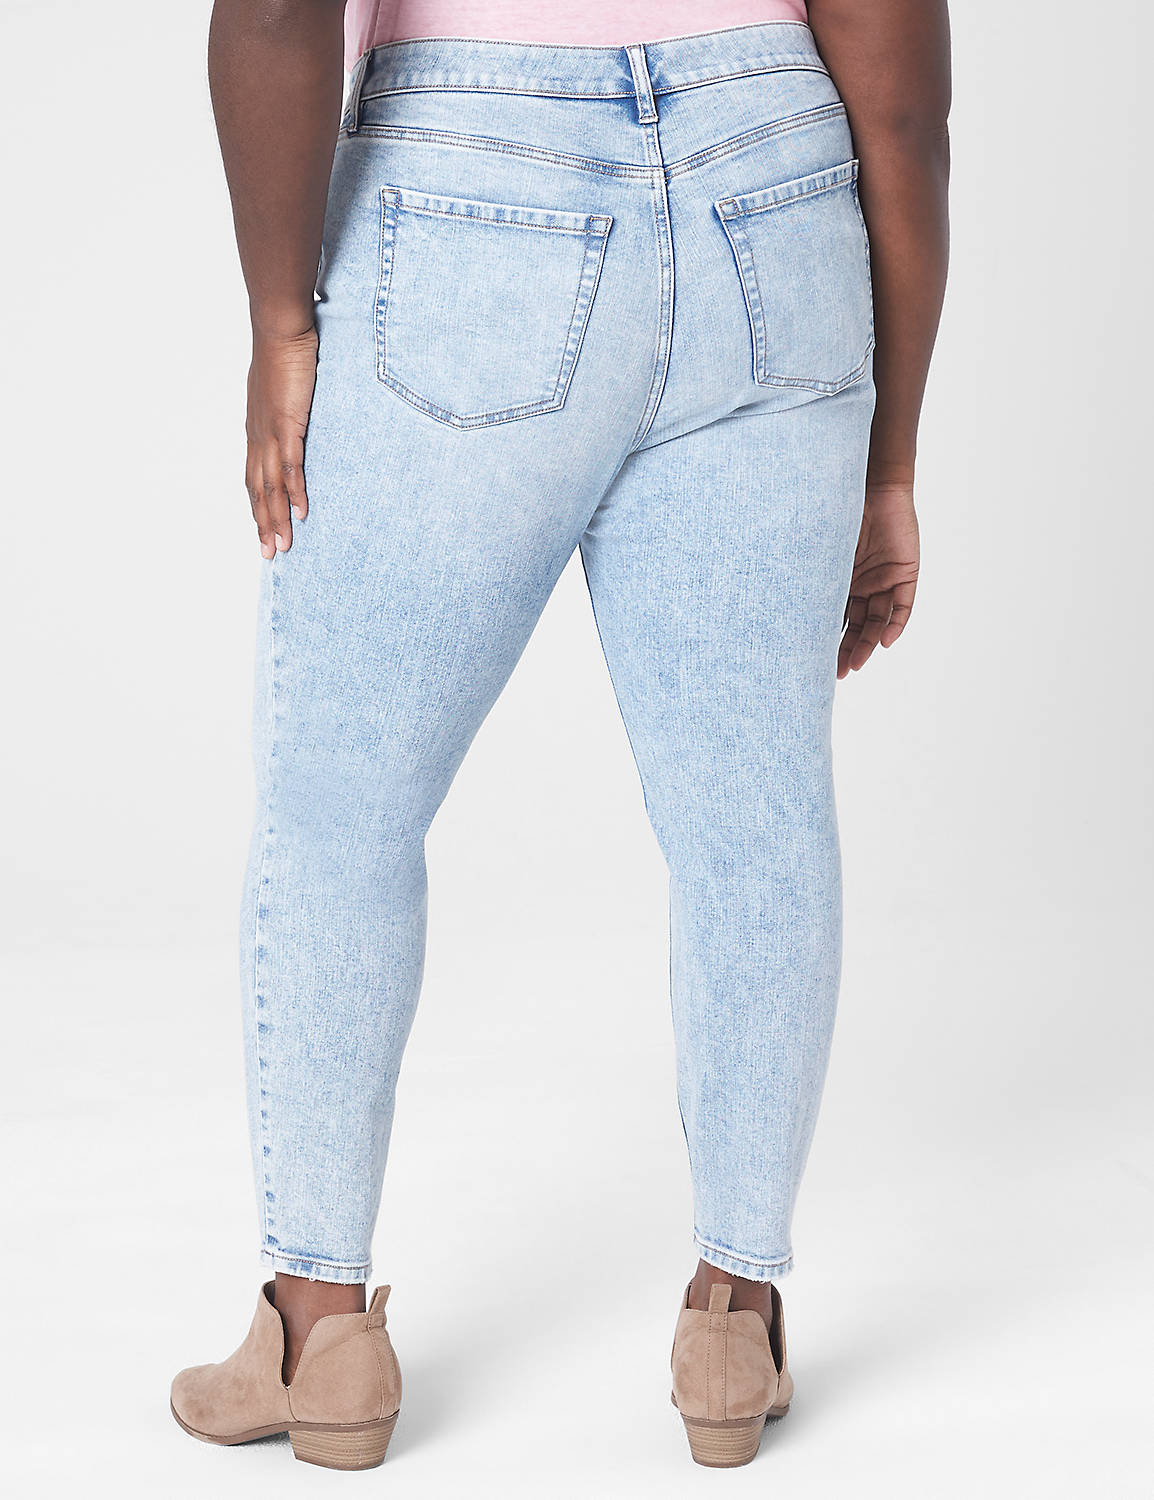 SIGNATURE FIT MID RISE SKINNY - BAC Product Image 2